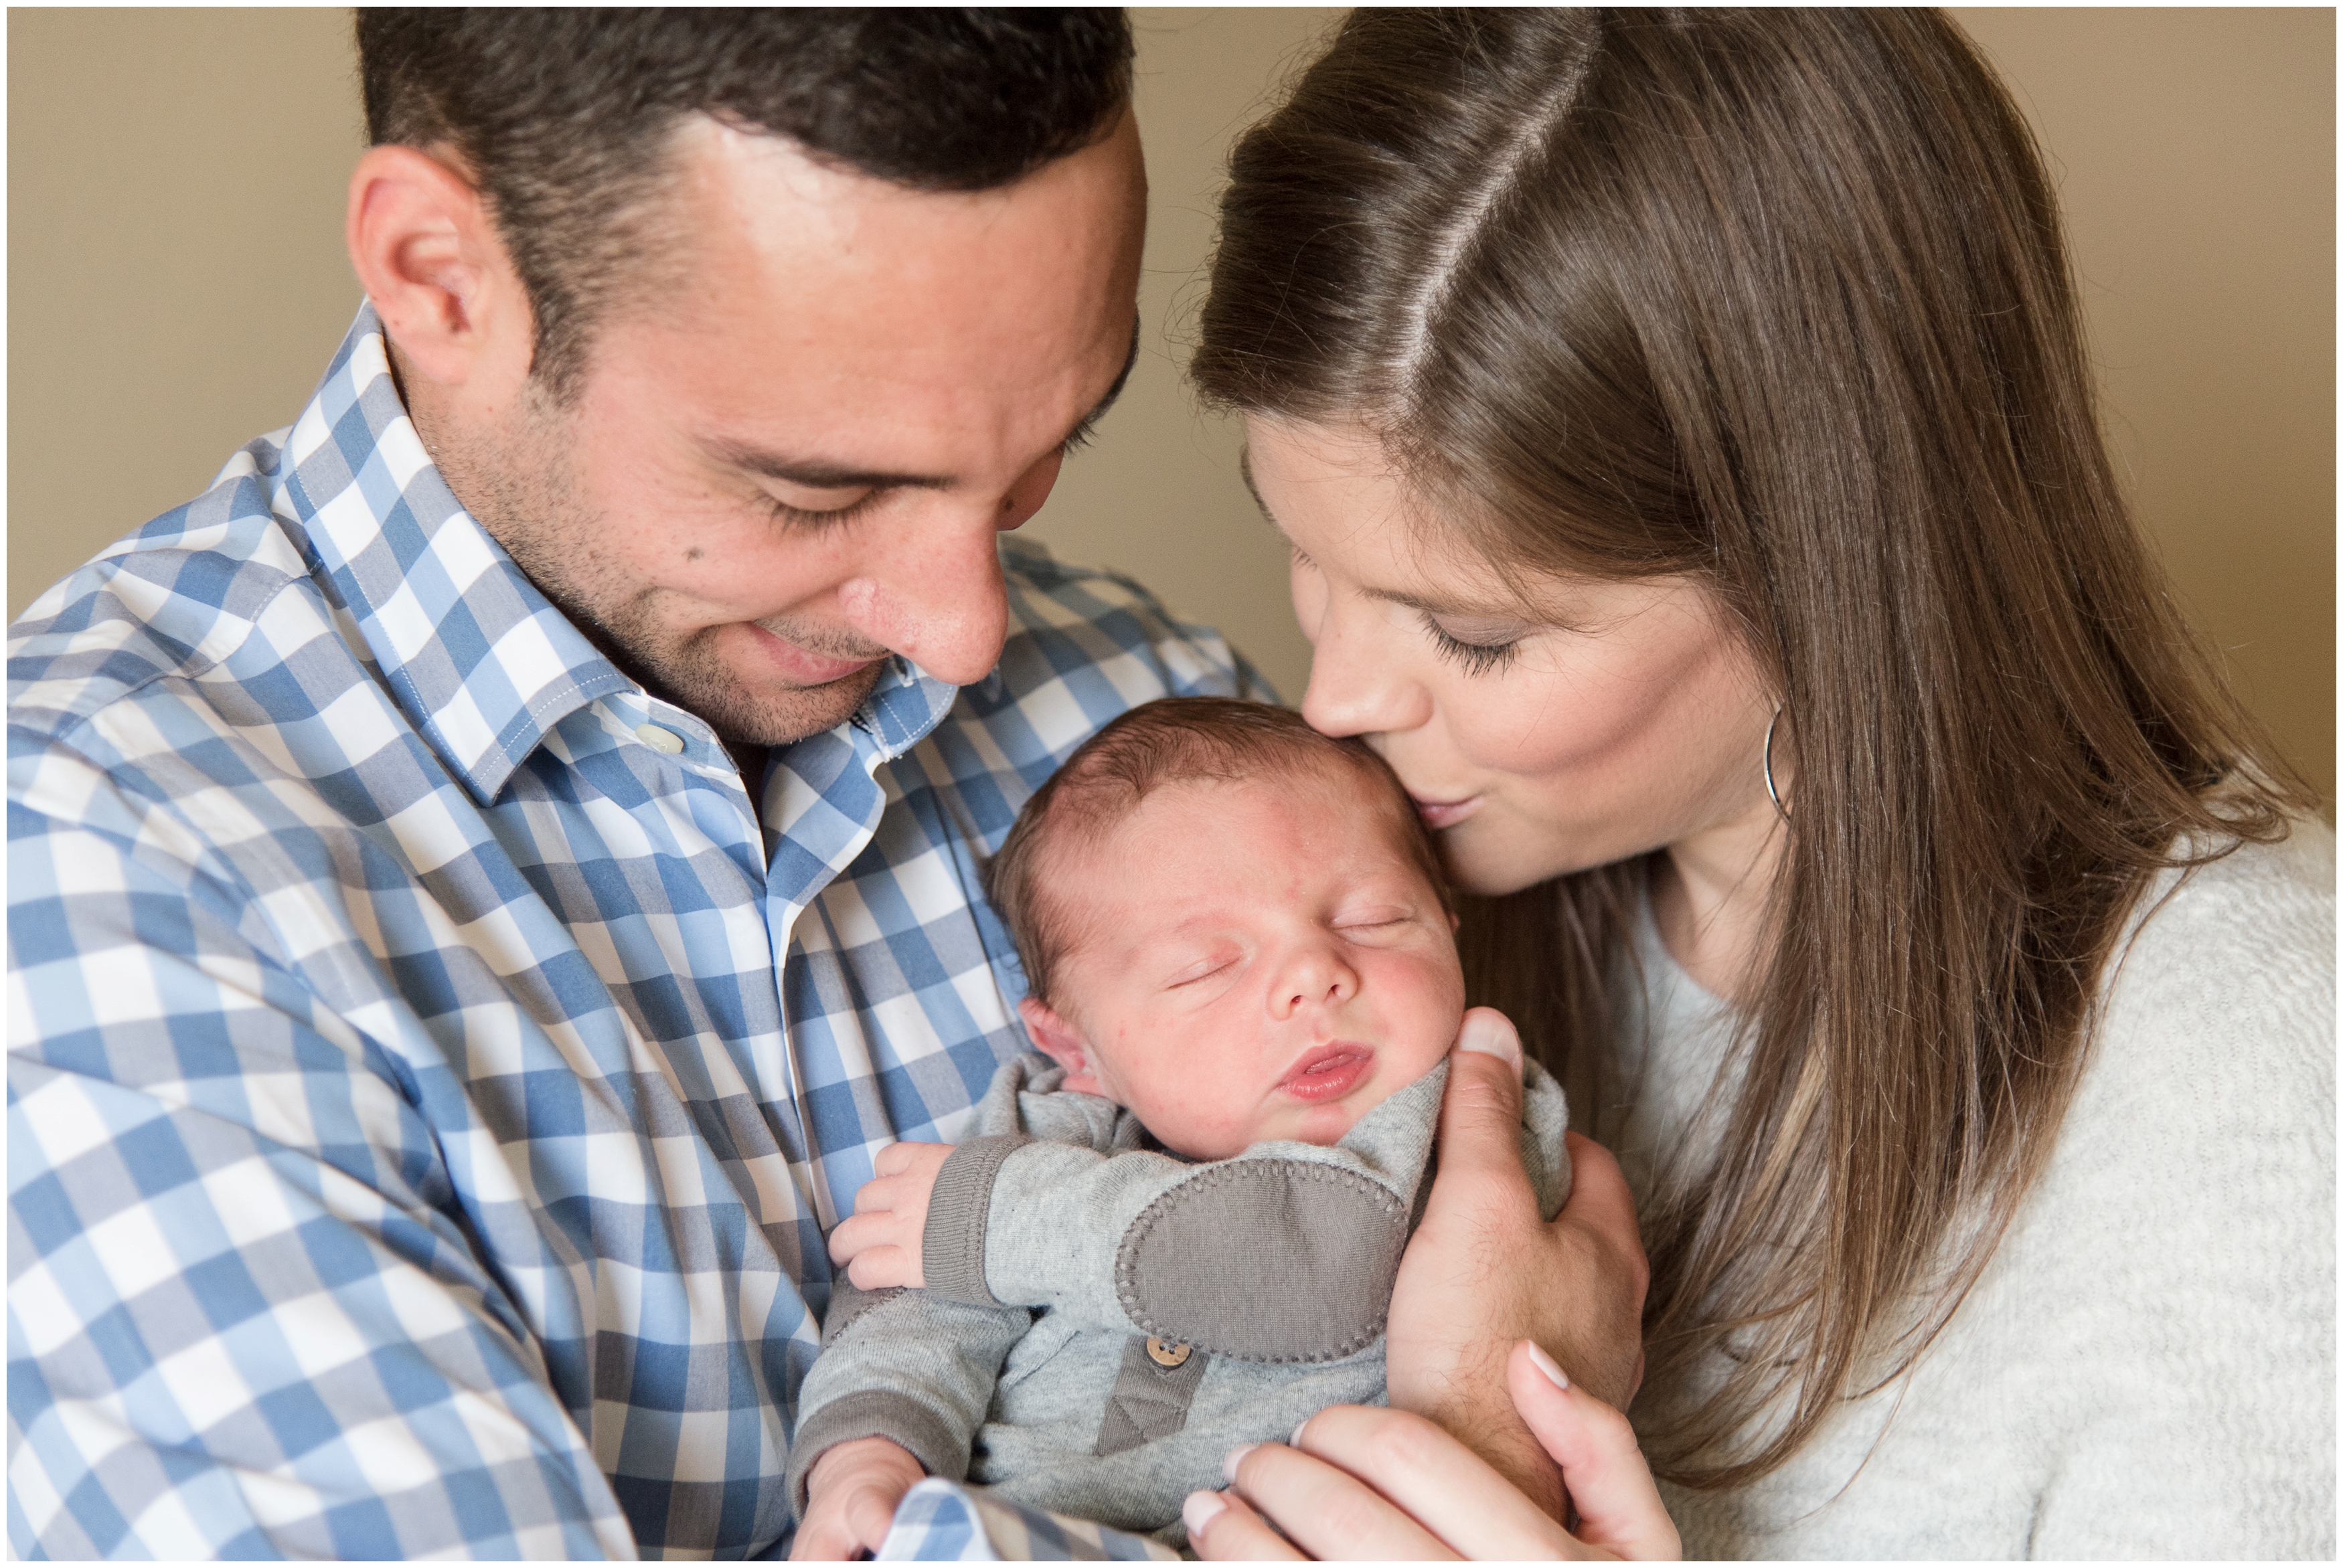 Kingwood photographer - at home lifestyle newborn portrait session for baby boy